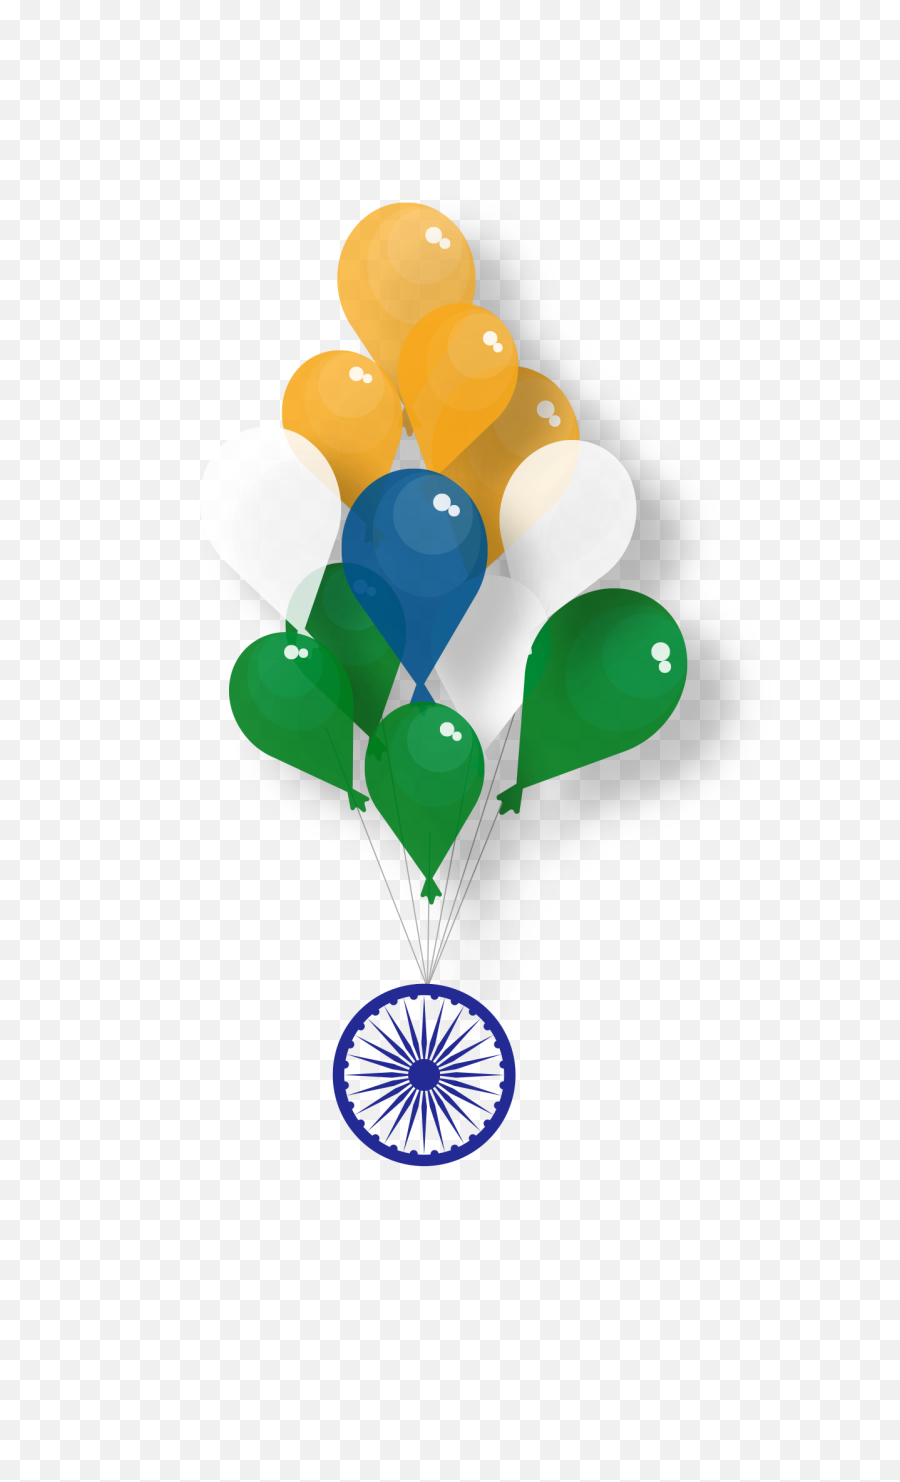 Hd Indian Flag Png Image Free Download - Indian Flag Png Full Hd,India Flag Png